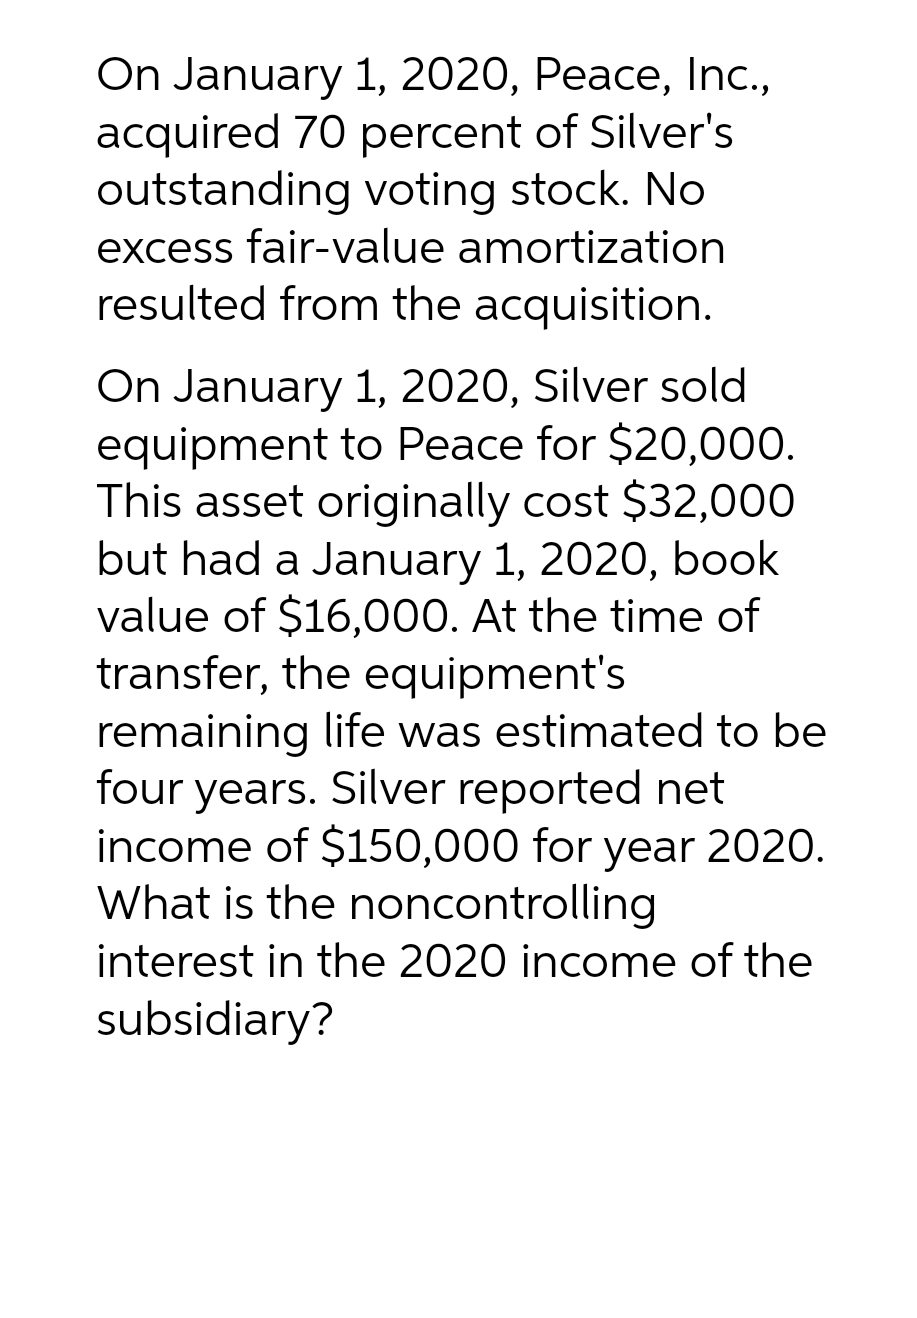 On January 1, 2020, Peace, Inc.,
acquired 70 percent of Silver's
outstanding voting stock. No
excess fair-value amortization
resulted from the acquisition.
On January 1, 2020, Silver sold
equipment to Peace for $20,000.
This asset originally cost $32,000
but had a January 1, 2020, book
value of $16,000. At the time of
transfer, the equipment's
remaining life was estimated to be
four years. Silver reported net
income of $150,000 for year 2020.
What is the noncontrolling
interest in the 2020 income of the
subsidiary?